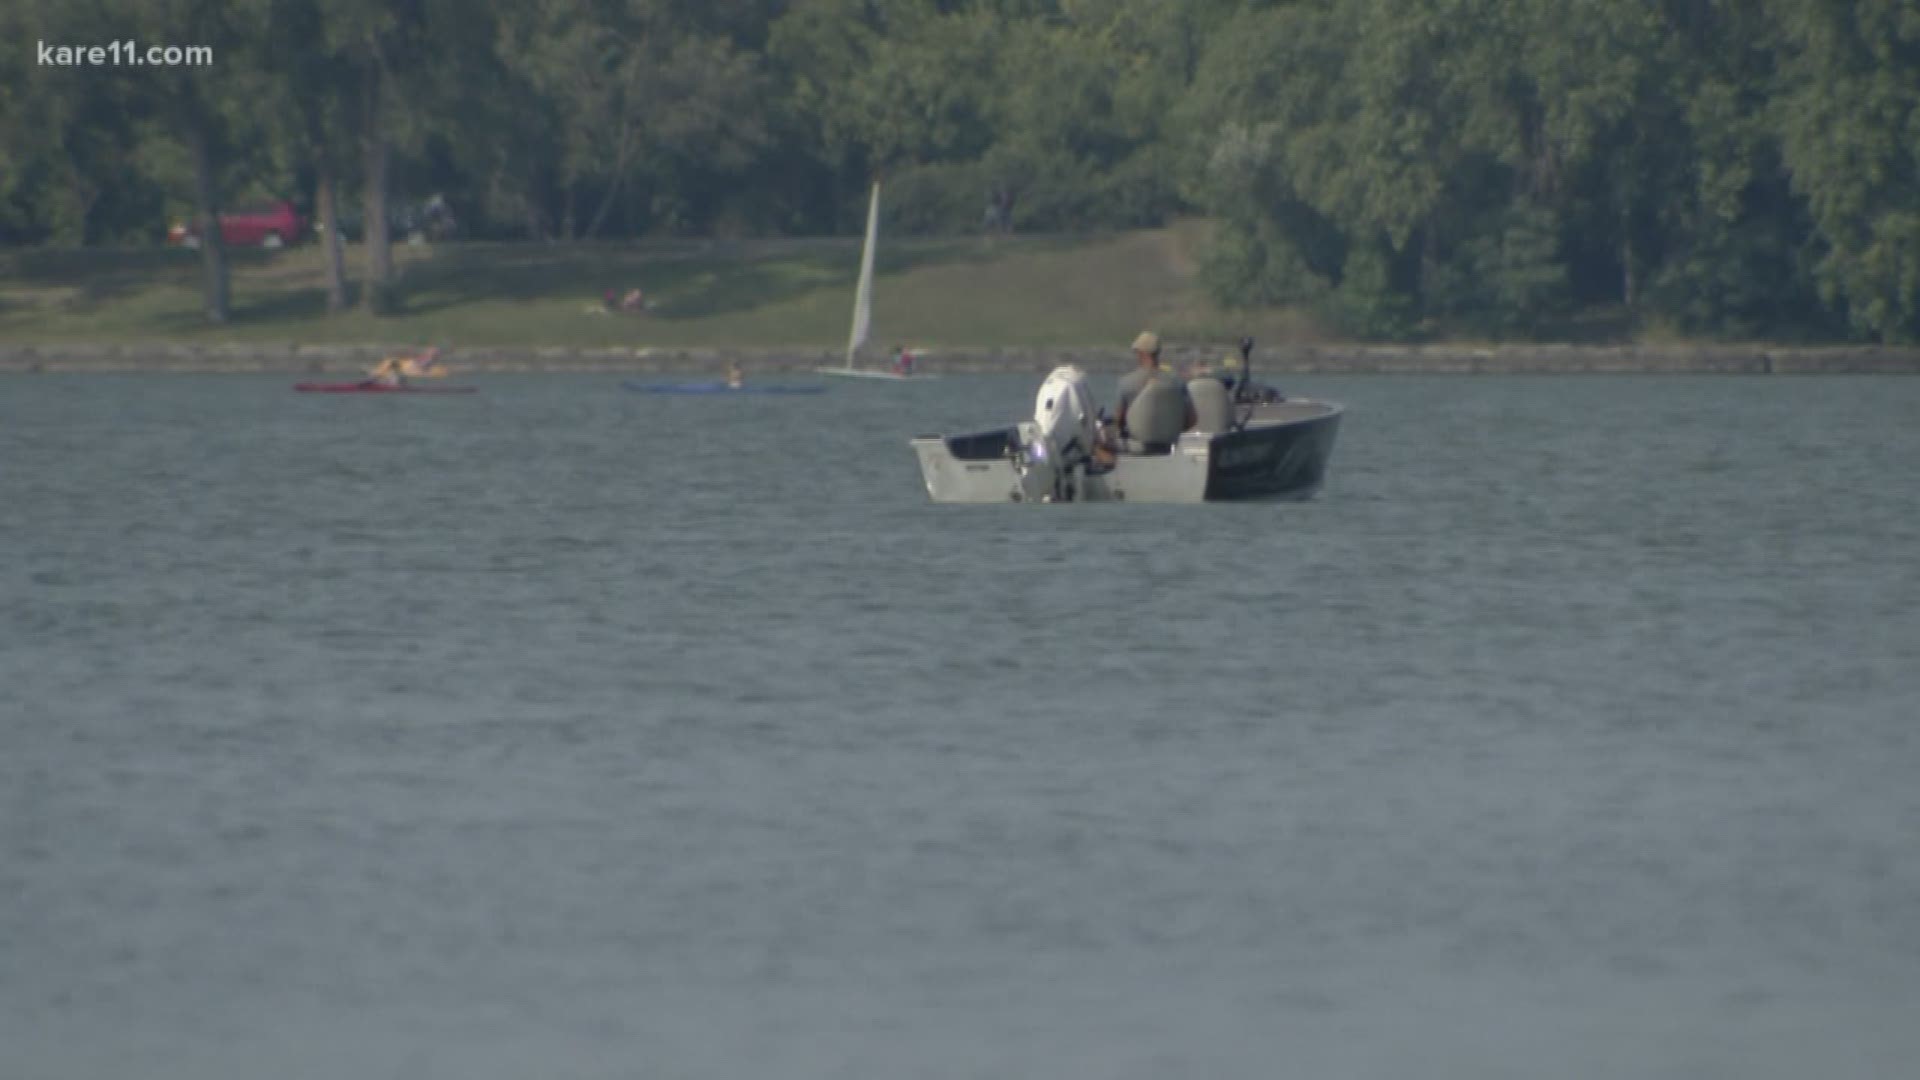 Witnesses said a man was retrieved from under the floating dock near the Linden Hills side of the lake. He was given CPR by the lifeguard and others and a man with a boat was able to get him to shore to the police and ambulance.